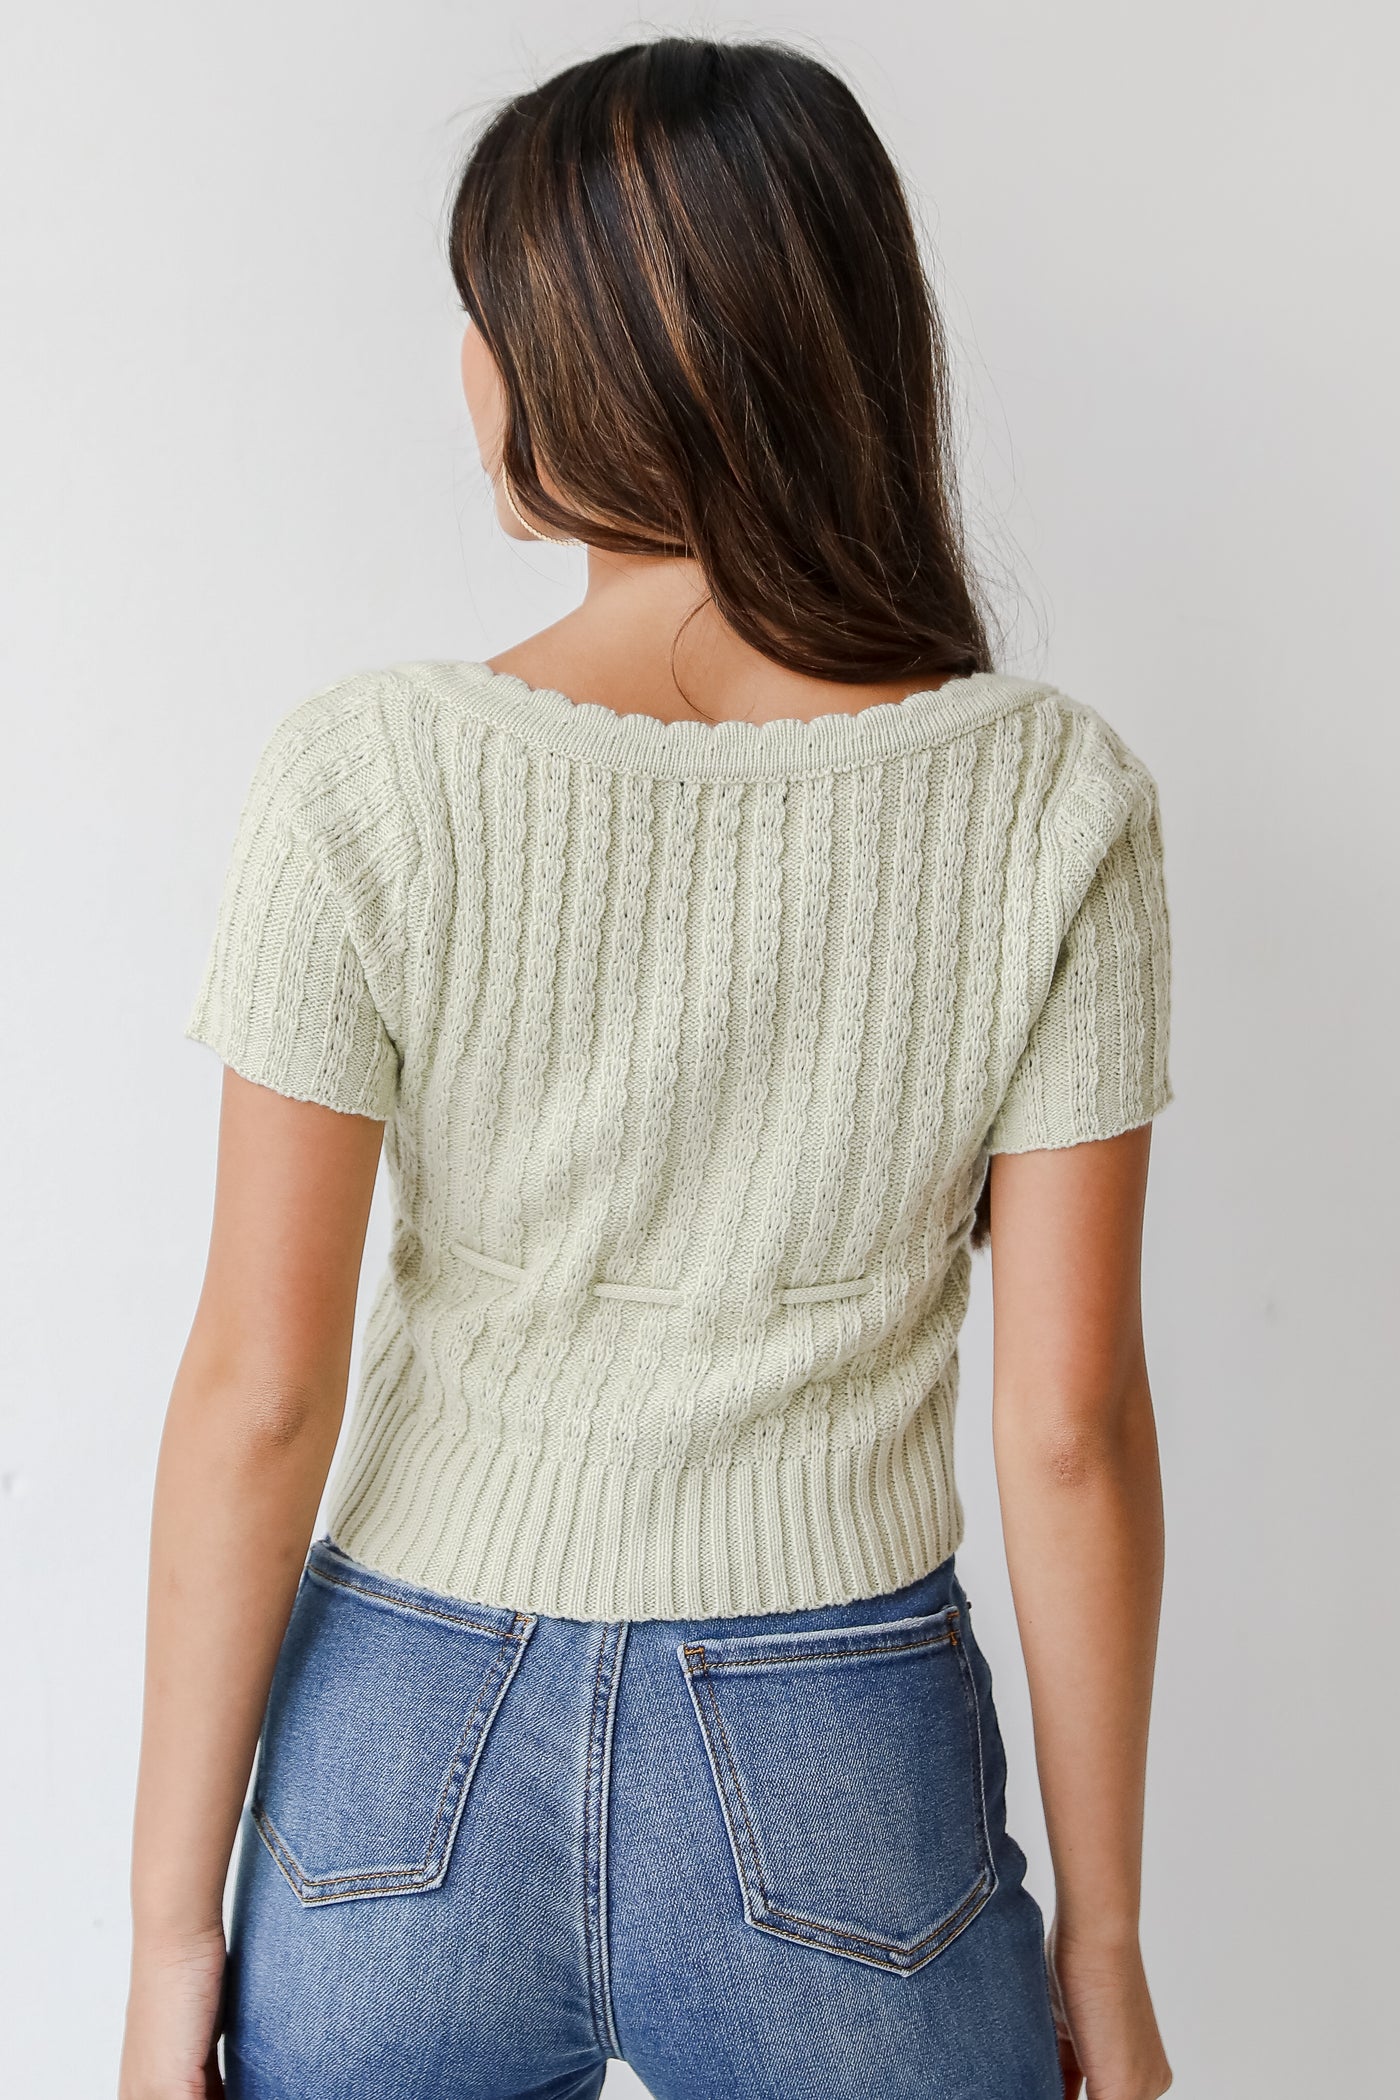 cropped sweater top back view